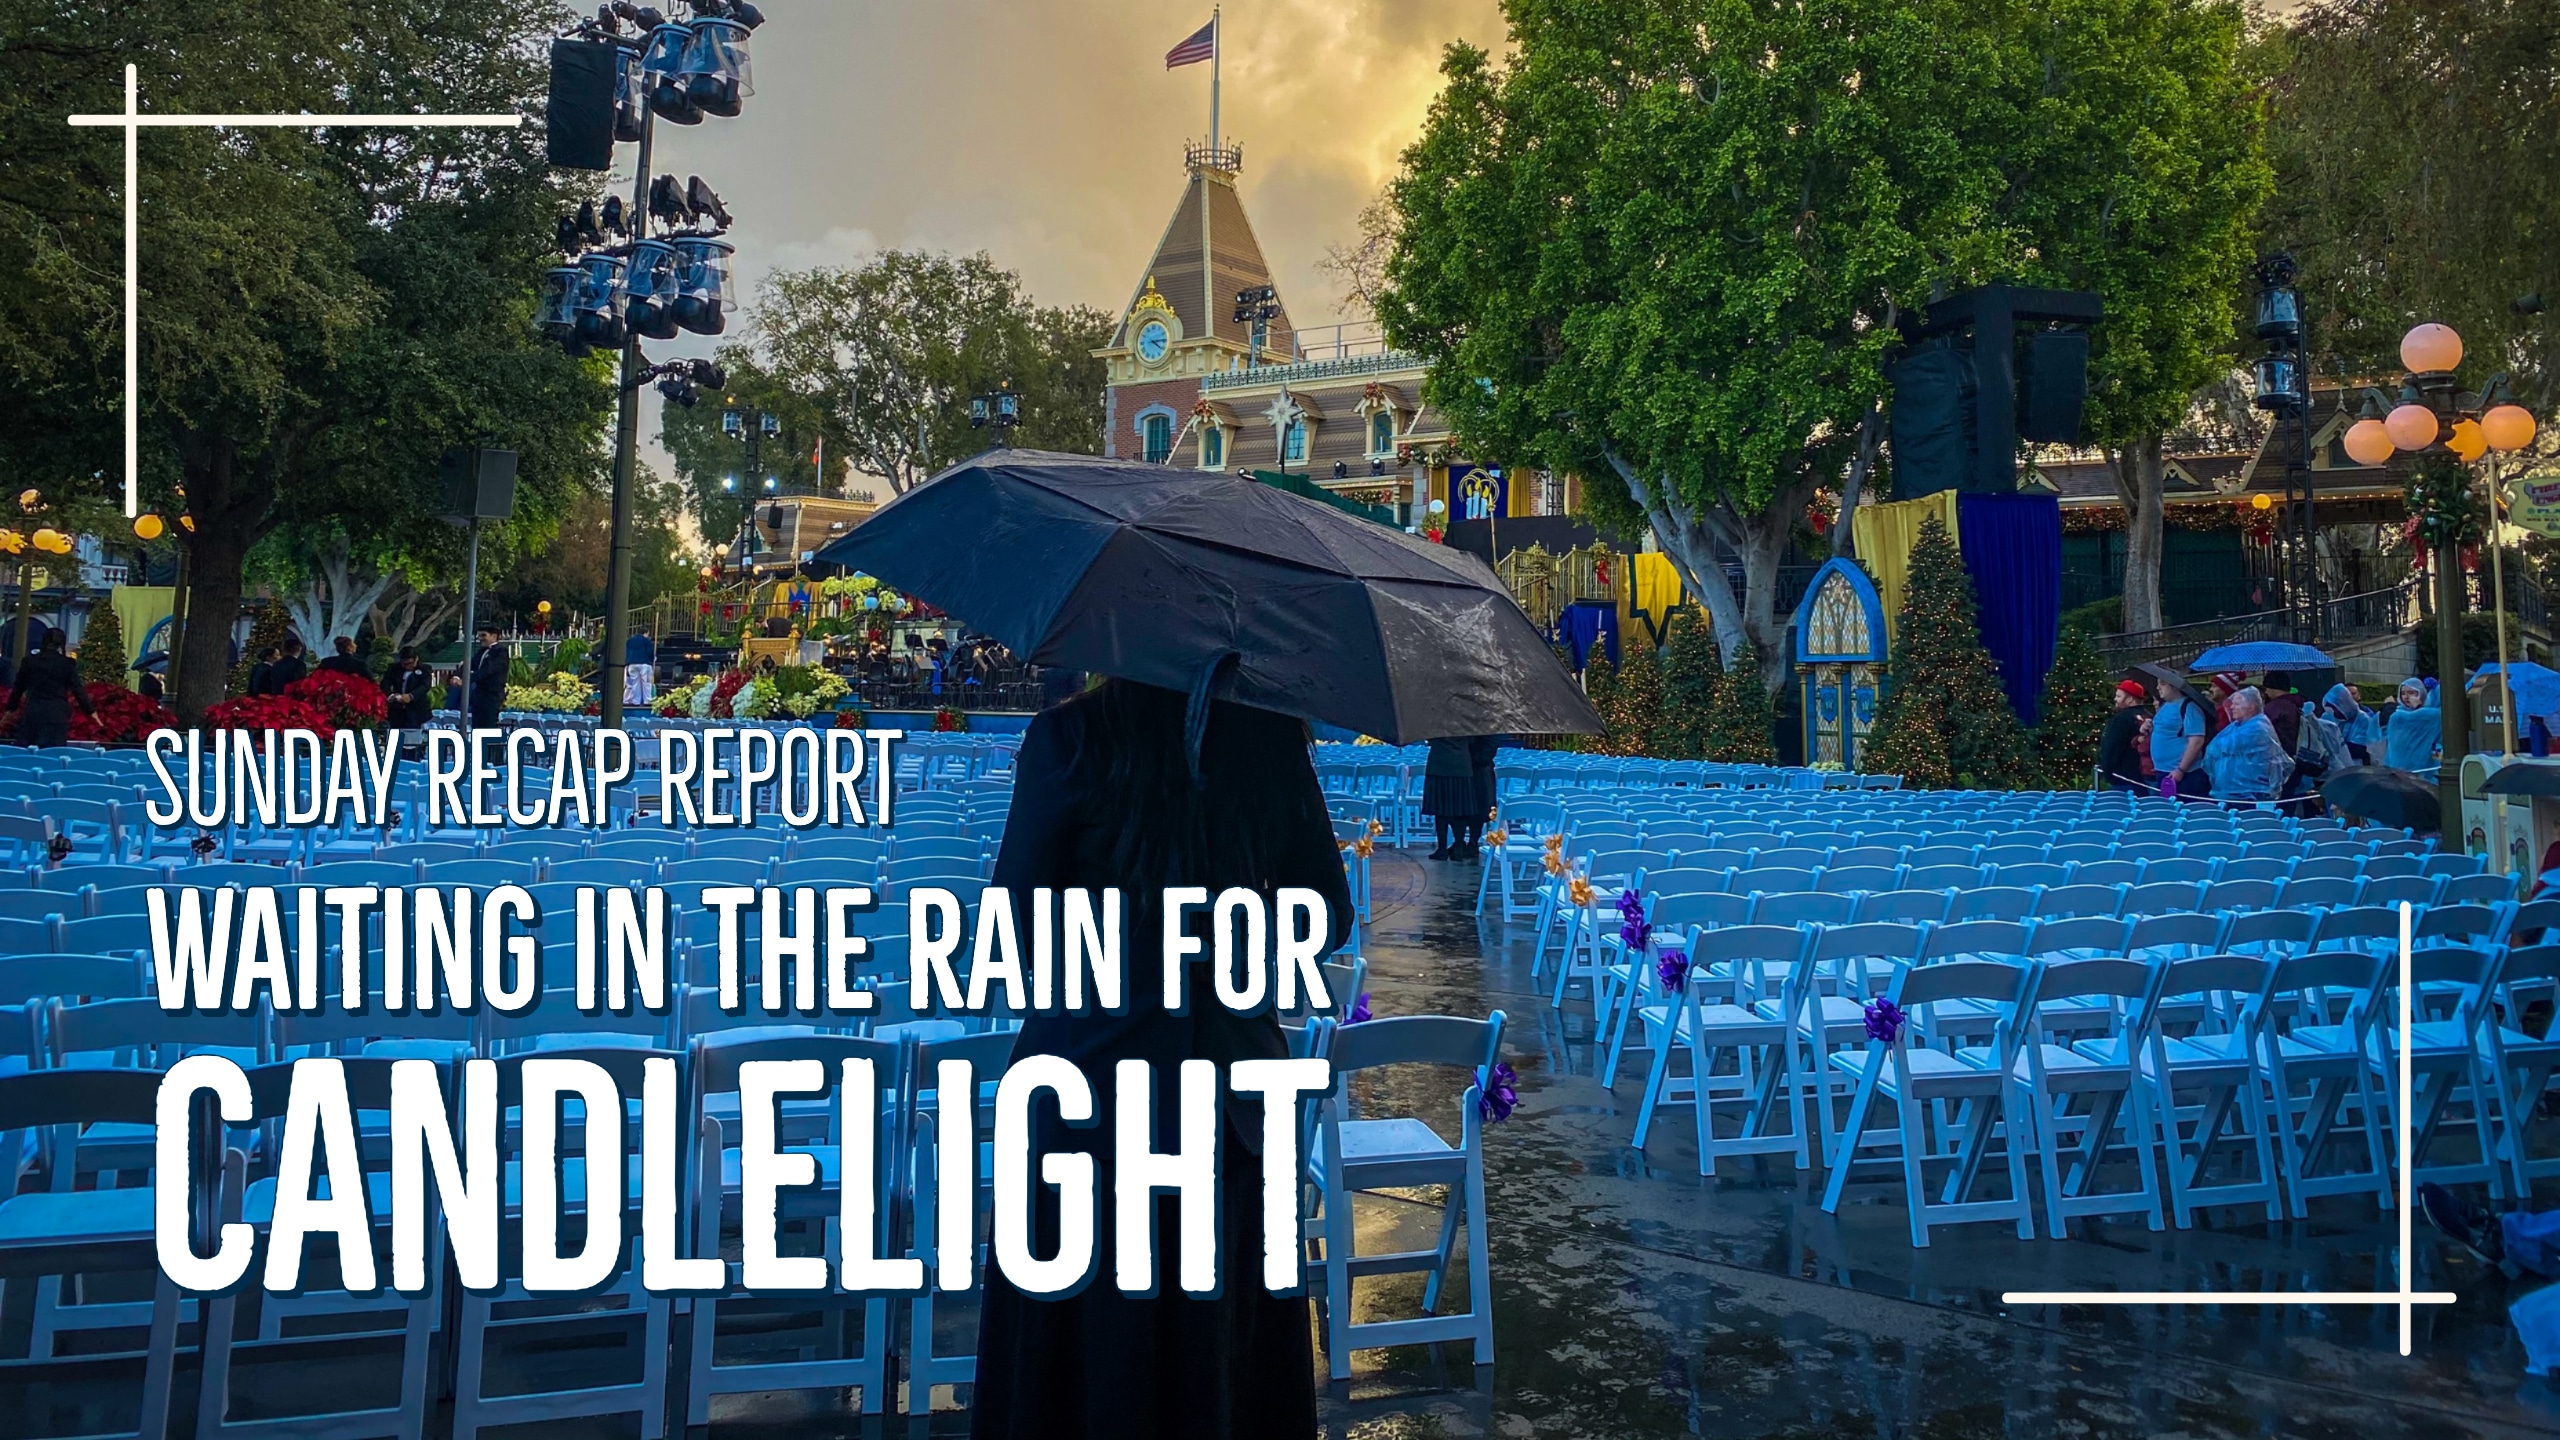 Sunday Recap Report – Waiting in the Rain for Candlelight